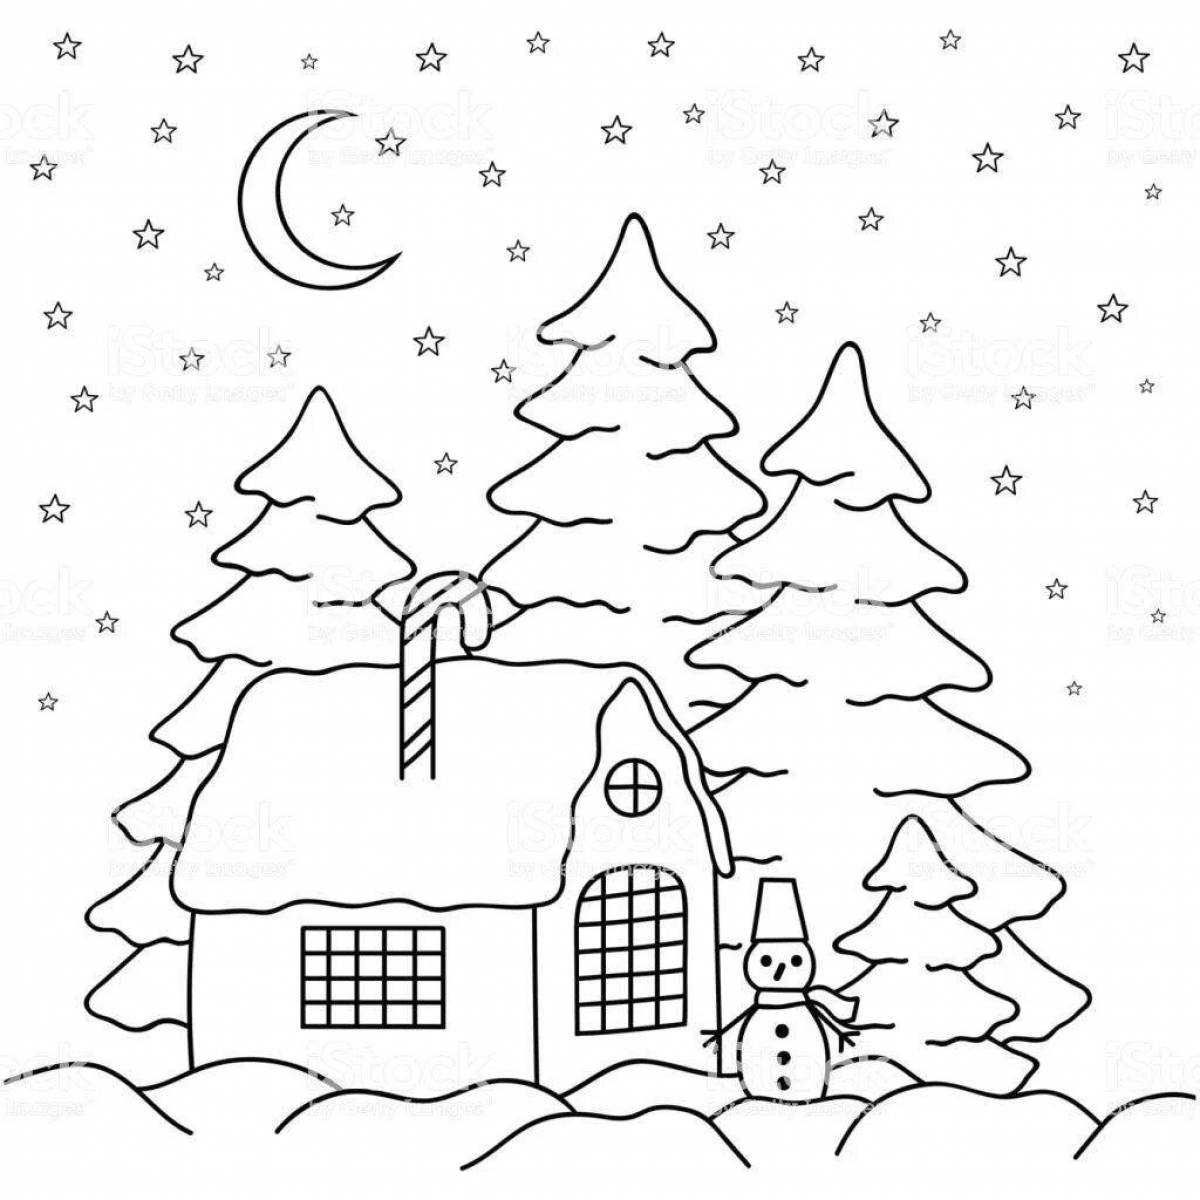 Glorious winter morning coloring page